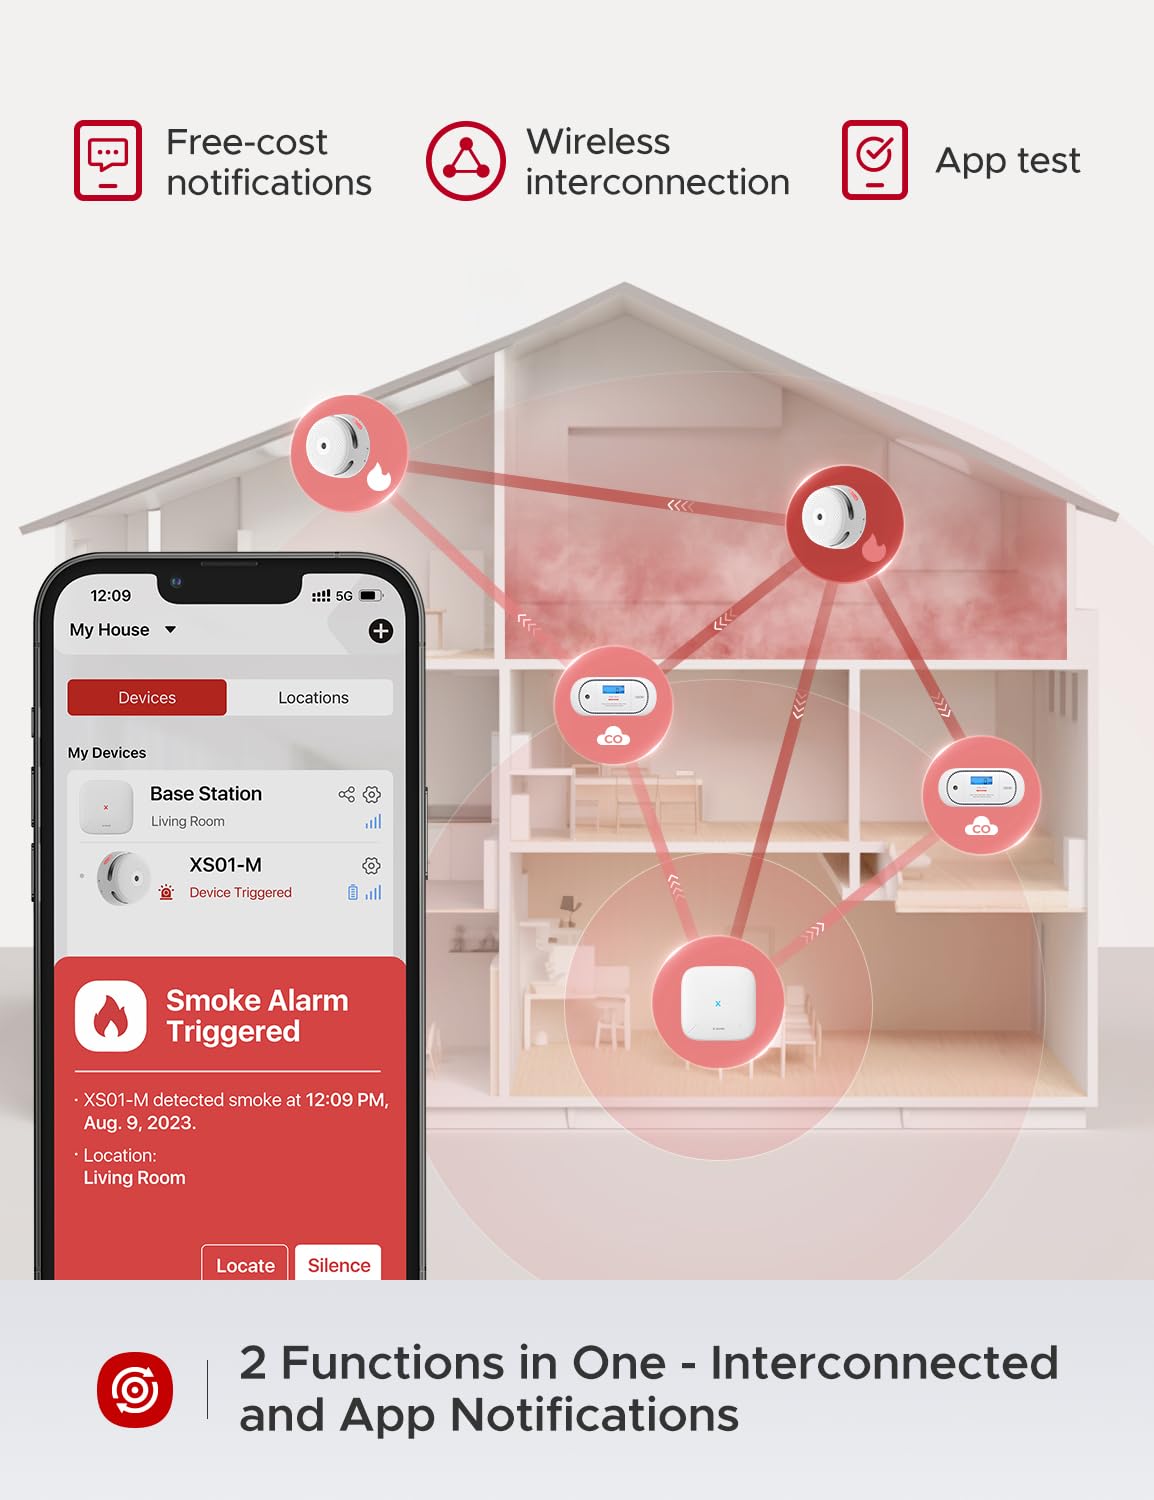 X-Sense Smart Smoke Detectors with SBS50 Base Station, Wi-Fi Smoke Alarm Compatible with X-Sense Home Security App, Wireless Interconnected Mini Fire Alarm, Model FS51